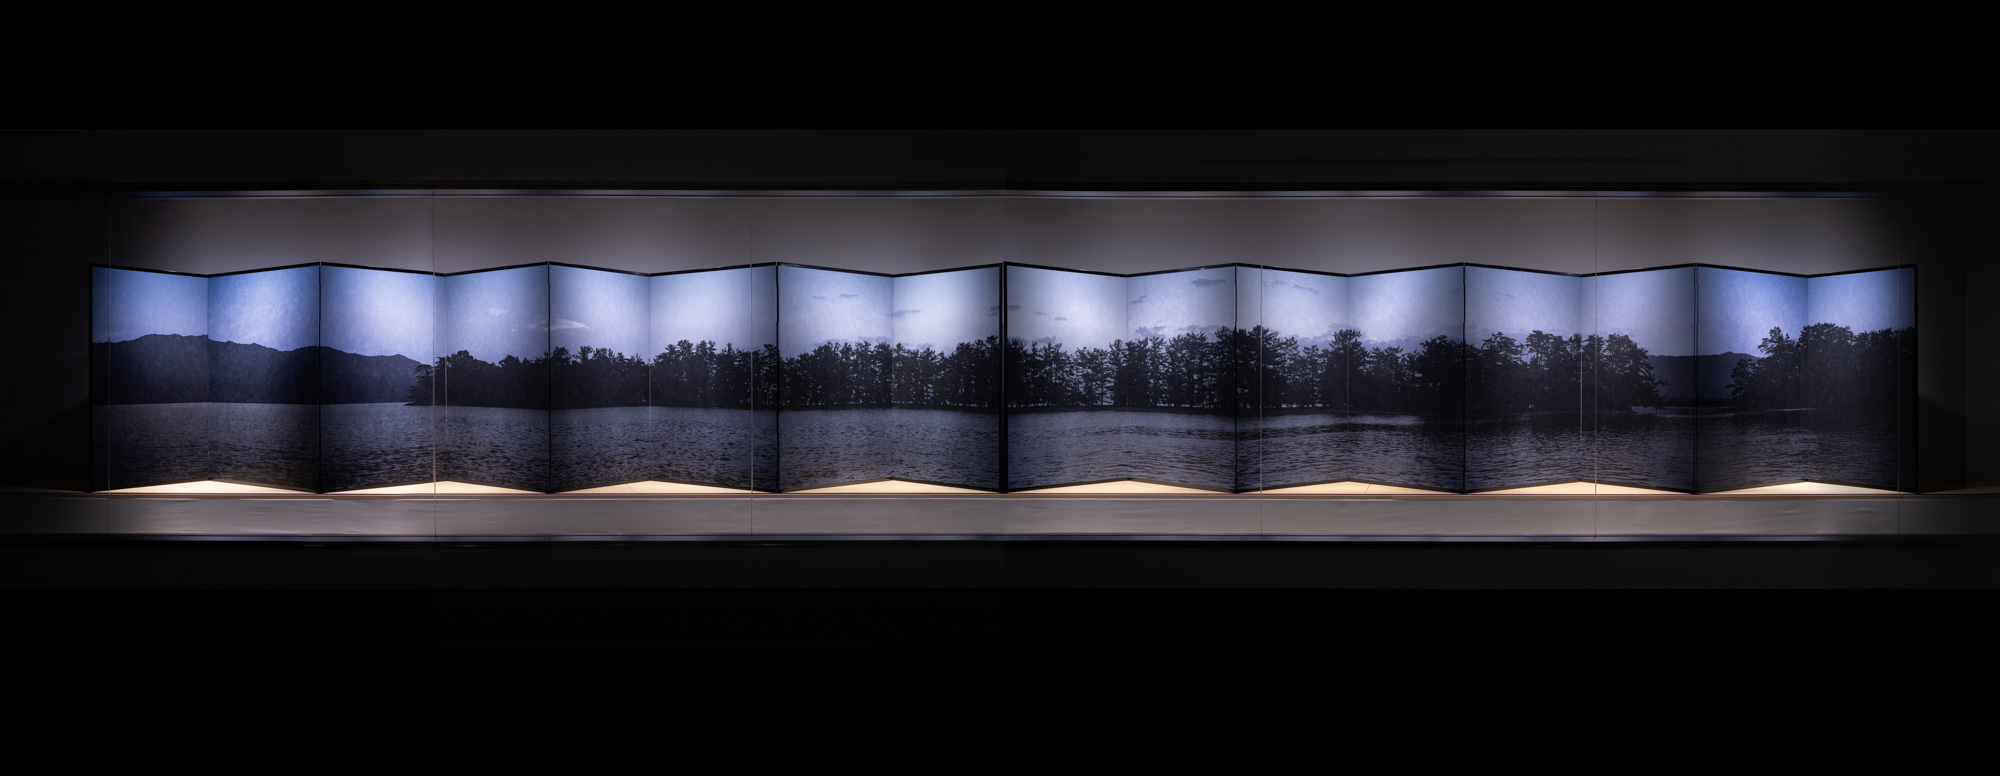 Installation view of a color photograph featuring a landscape mounted on a folding screen